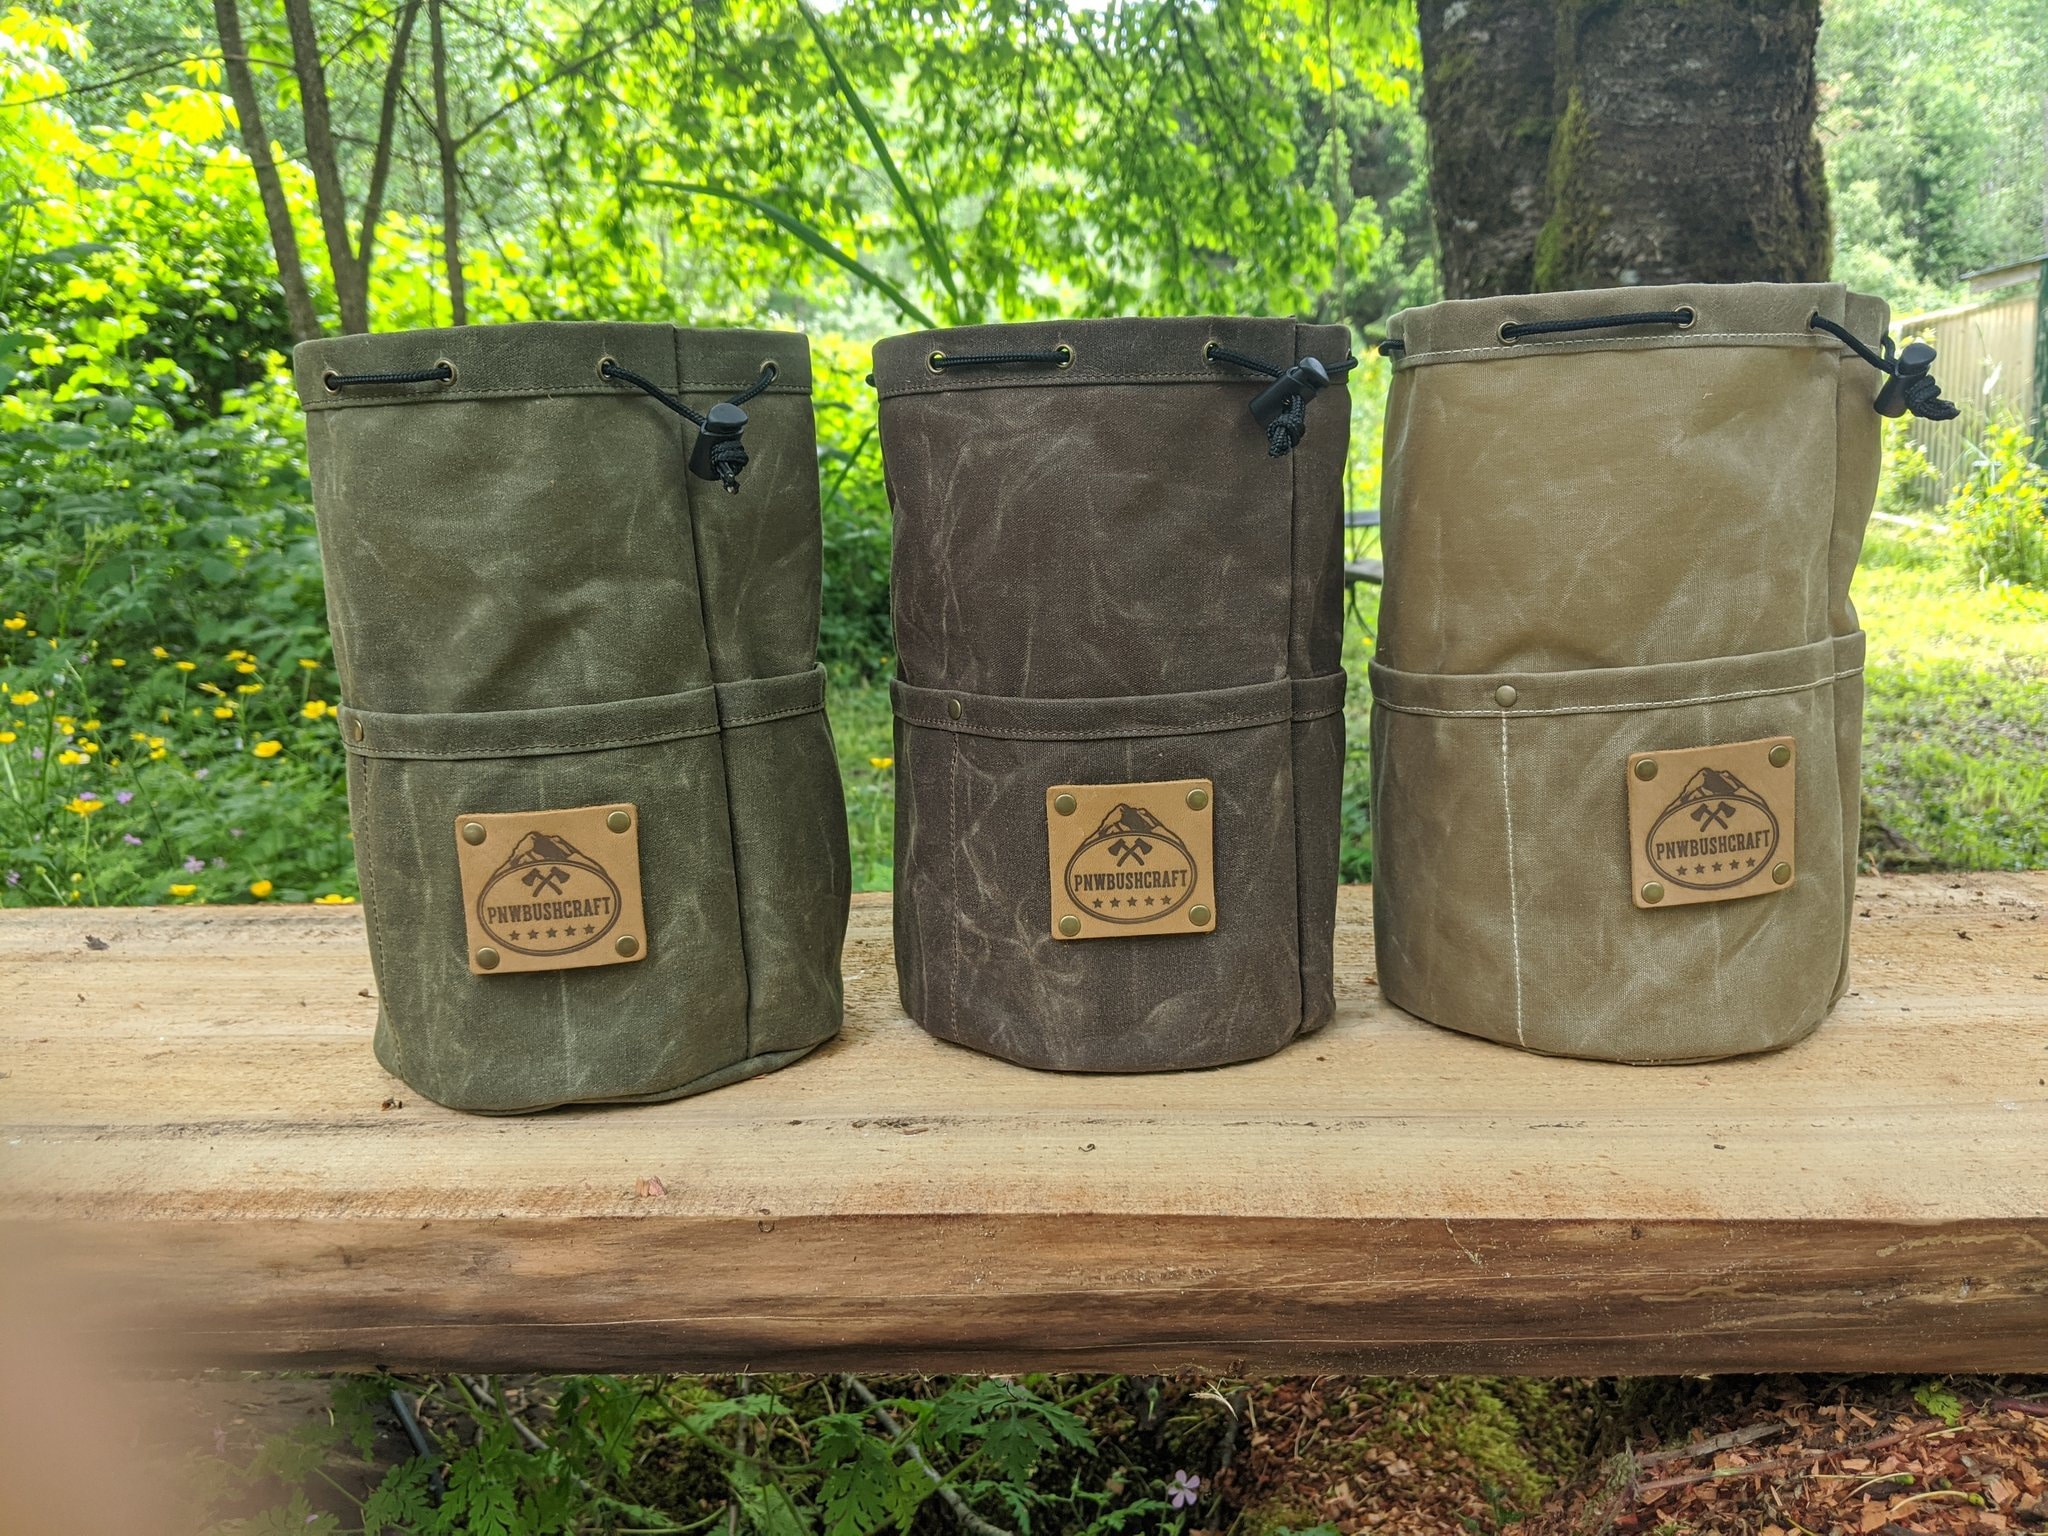 Cook Set Bag, Stanley Cook Set Pouch, Camp Utensil Bag, Camp Cooking Bag,  Waxed Canvas Gear, Bushcraft Gear, Survival Gear, Hiking Cook Set 